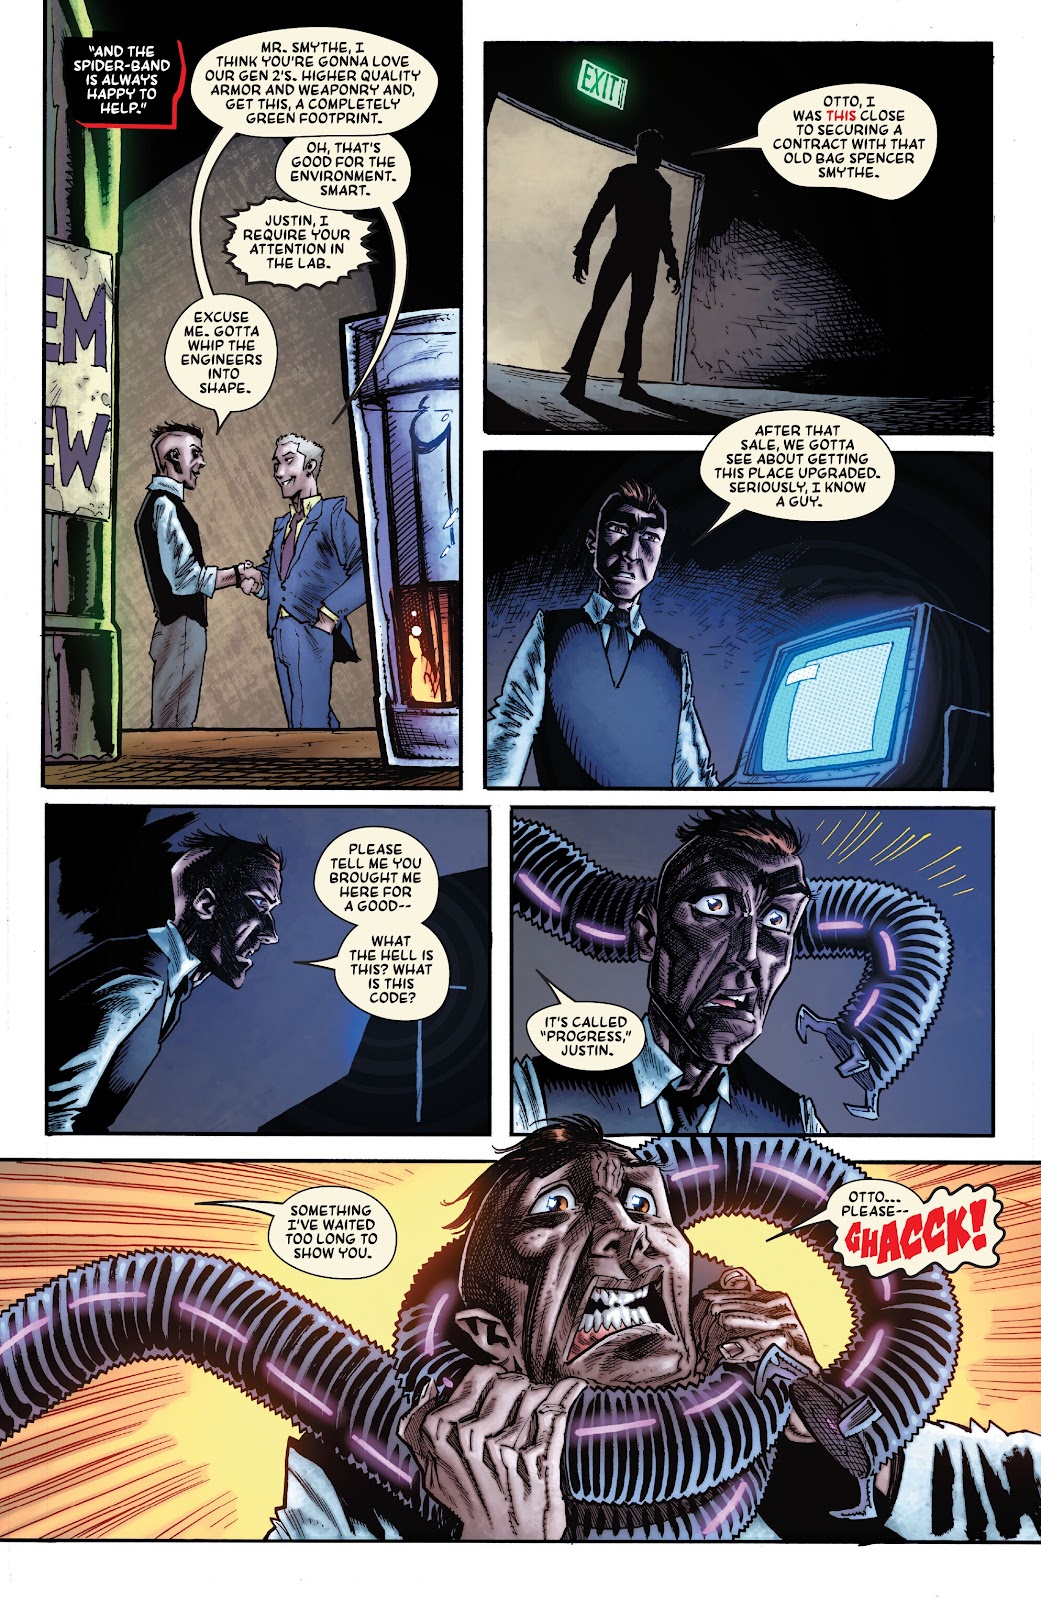 Spider-Punk: Arms Race issue 2 - Page 10